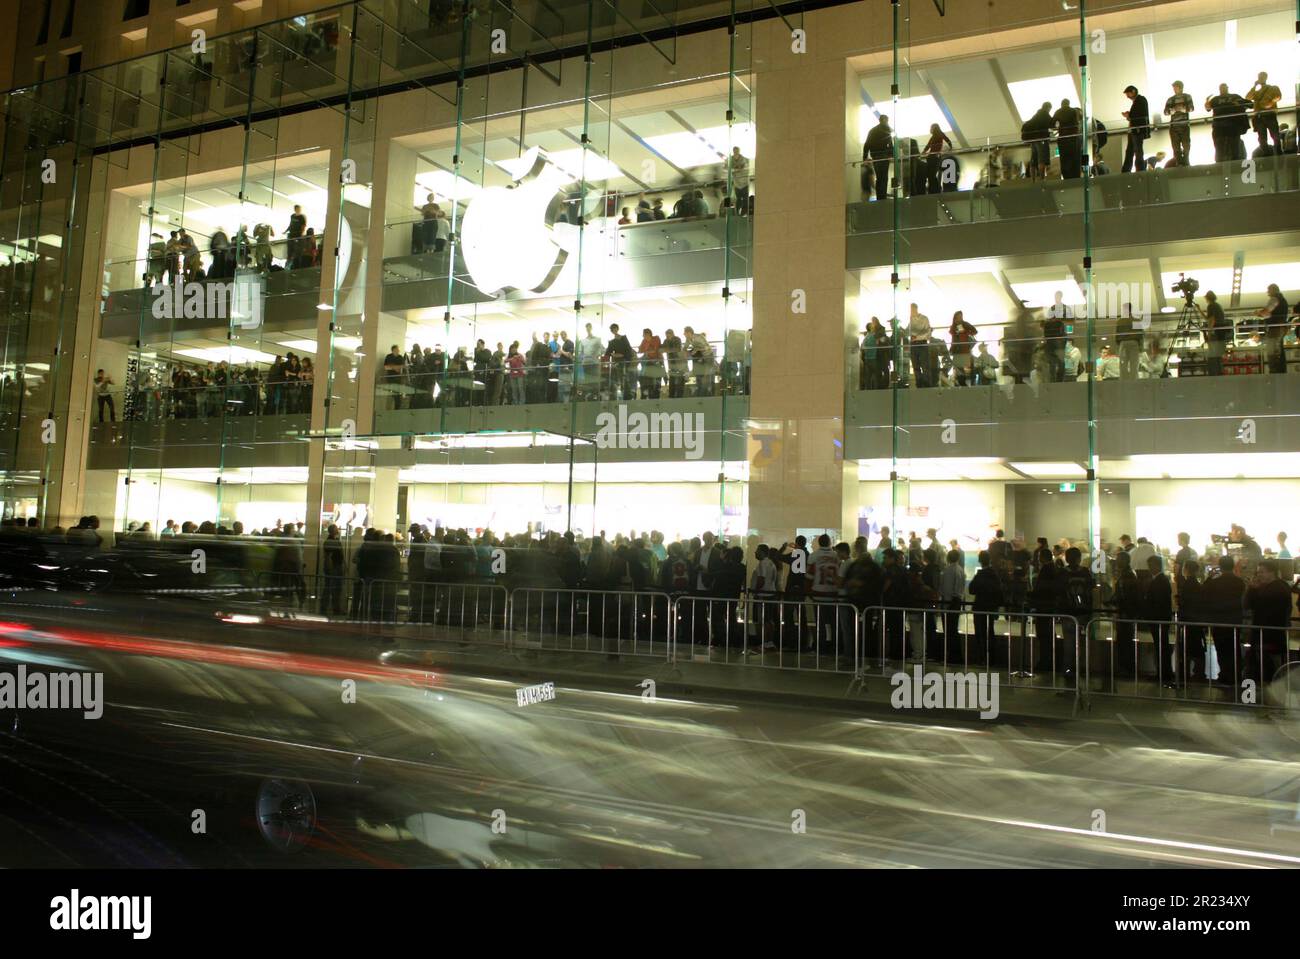 The official opening launch of Australia’s first Apple store, situated on George Street, the main road through the Sydney CBD. Some consumers had stood in line for more than 24 hours to be among the first to visit the new store. Sydney, Australia, 19 June 2008. Stock Photo